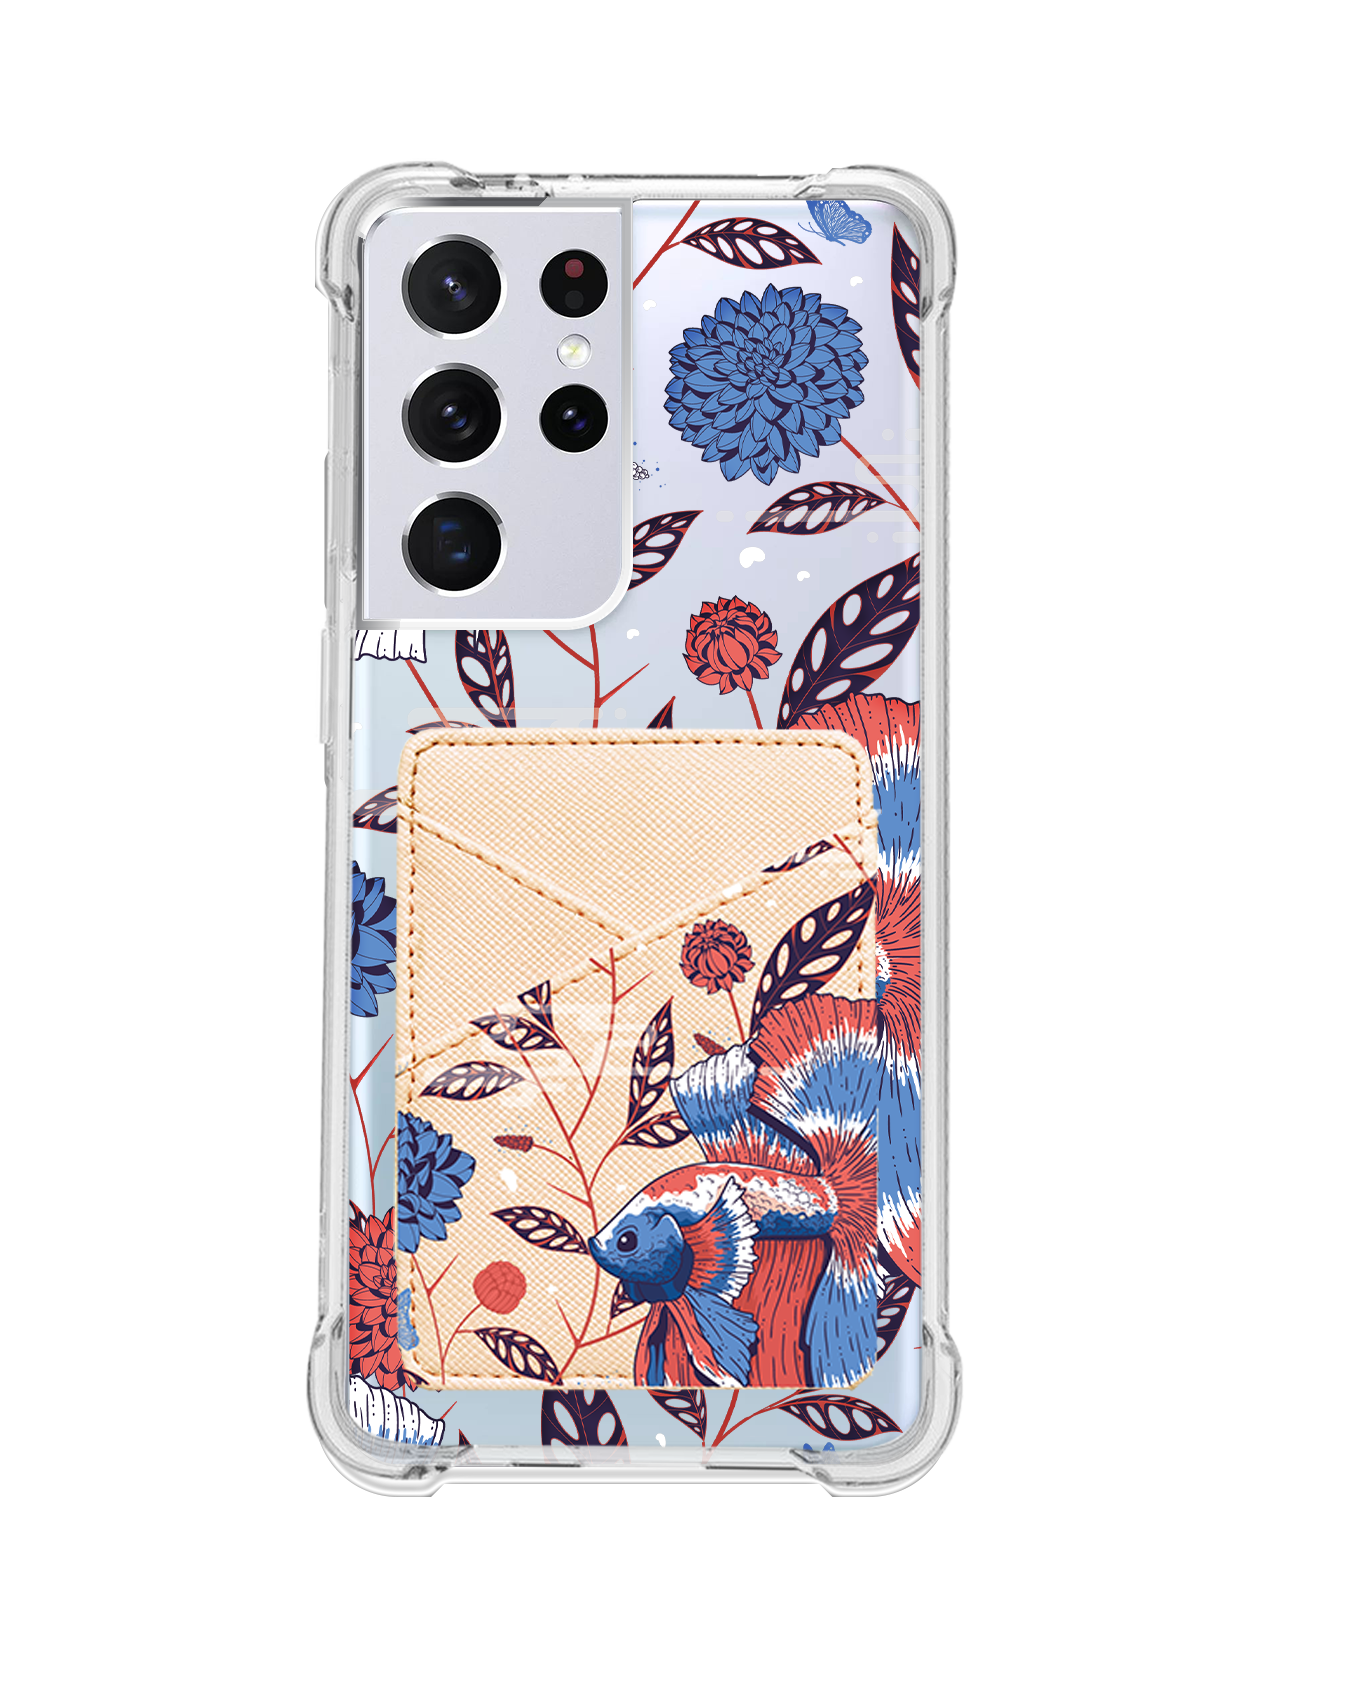 Android Phone Wallet Case - Fish & Floral 2.0